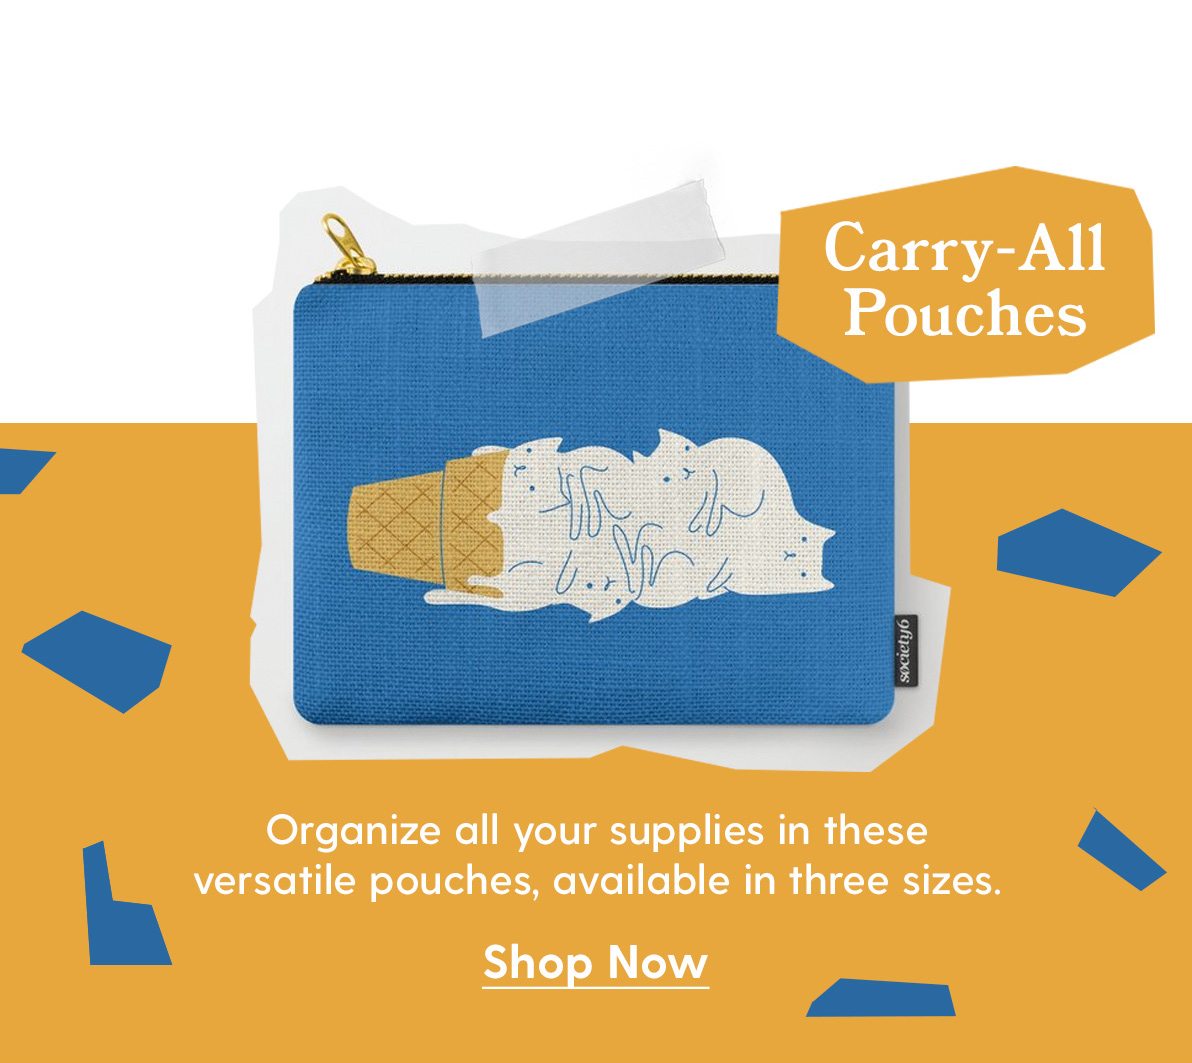 Carry-All Pouches Organize all your supplies in these versatile pouches, available in three sizes. Shop Now